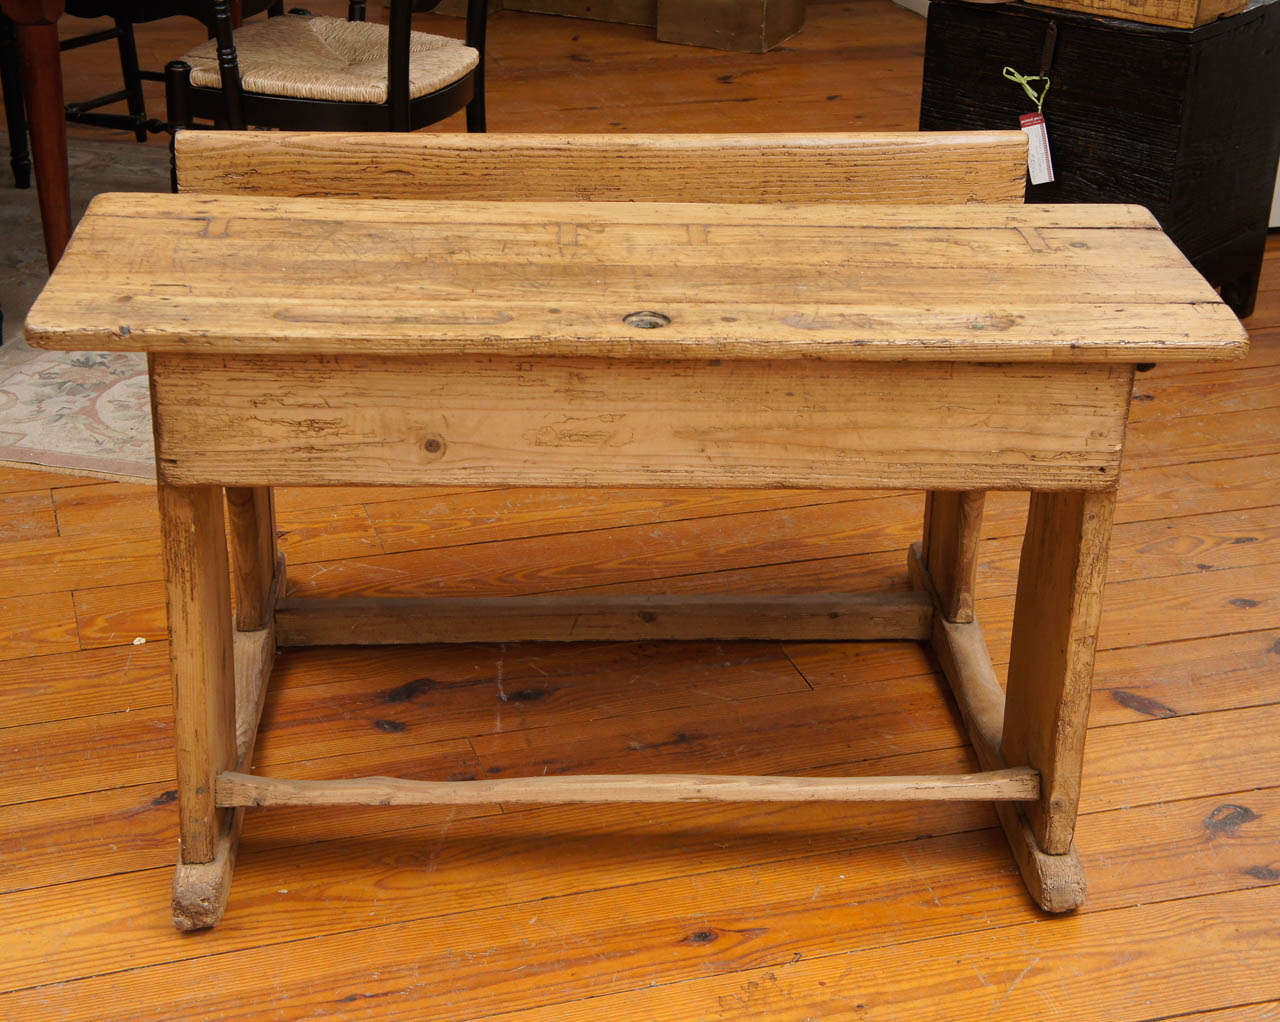 This sturdy and cute little desk came from England, circa 1840. It is the perfect piece for a child's room or family room. It has a nice writing surface, double pencil groove, inkwell and below the top is a shelf for storage.
43 1/2